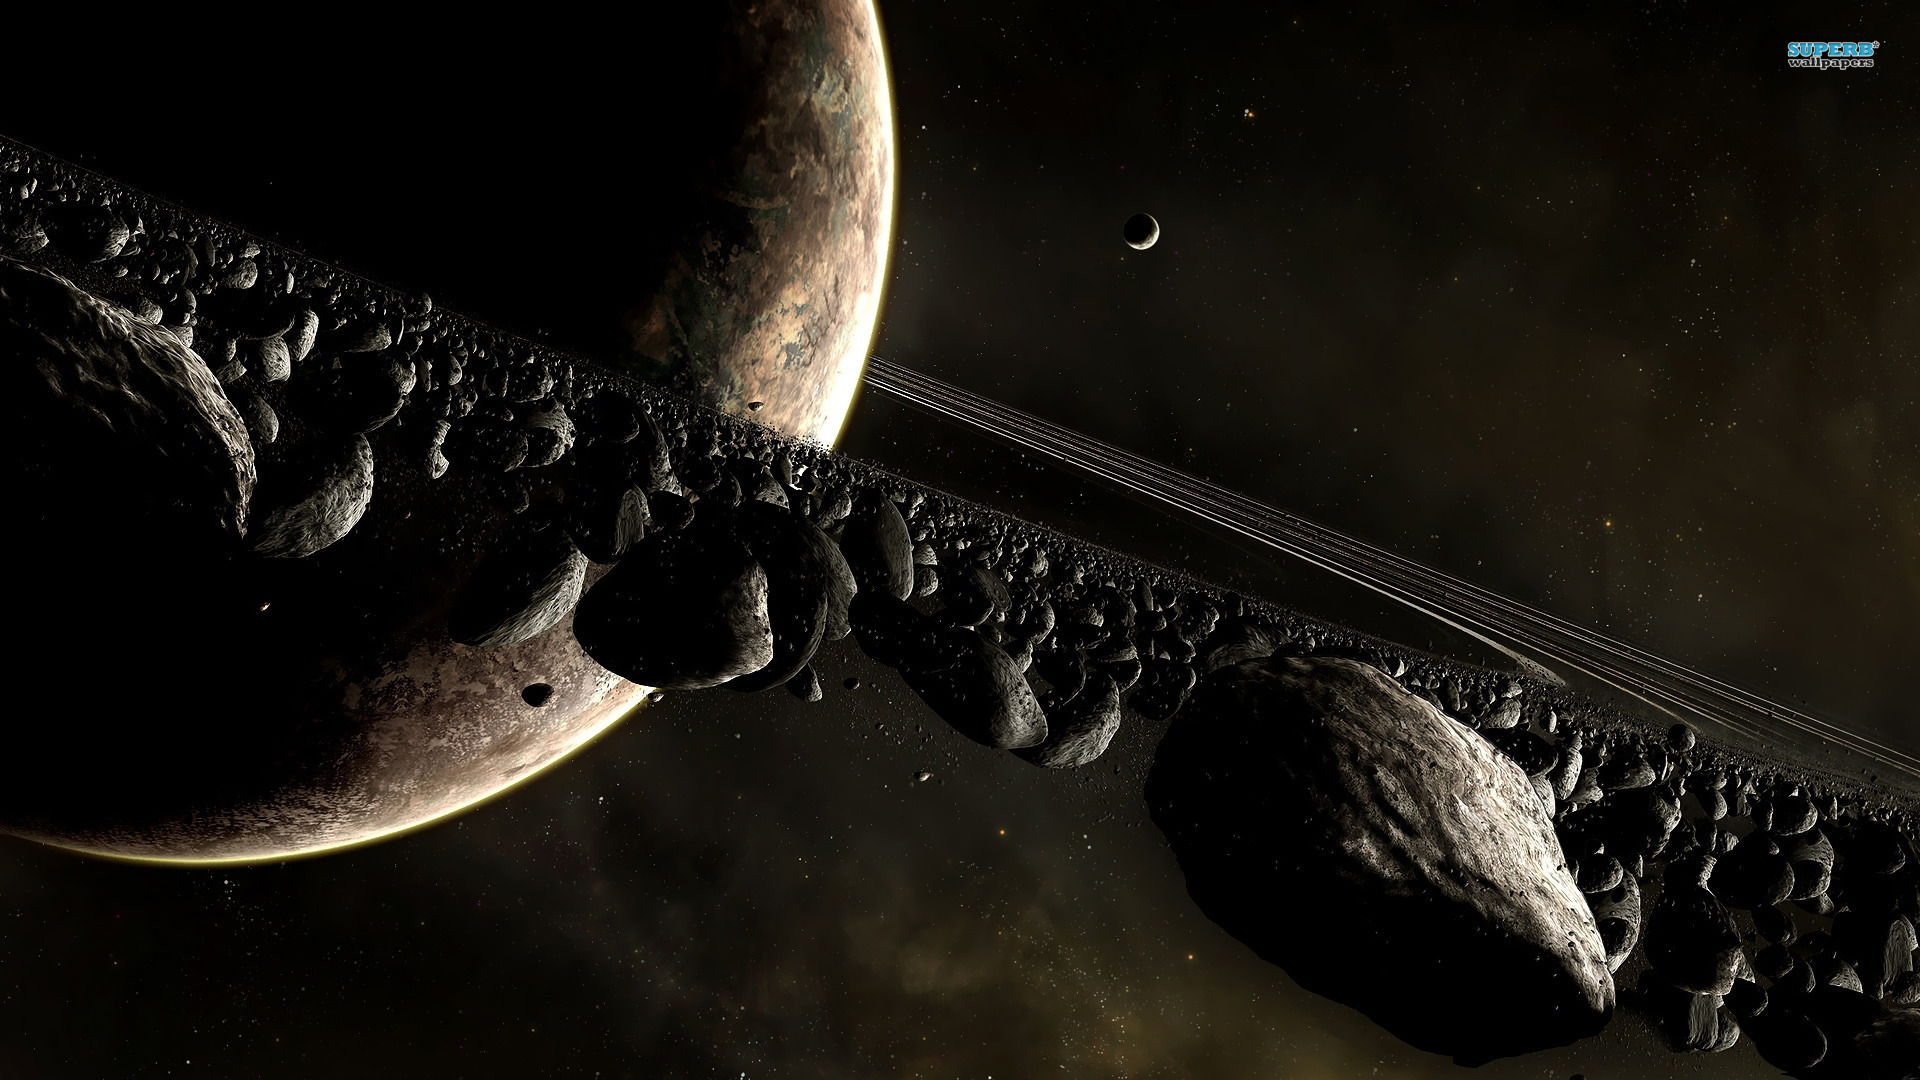 Planets and asteroids wallpaper 1920x1080